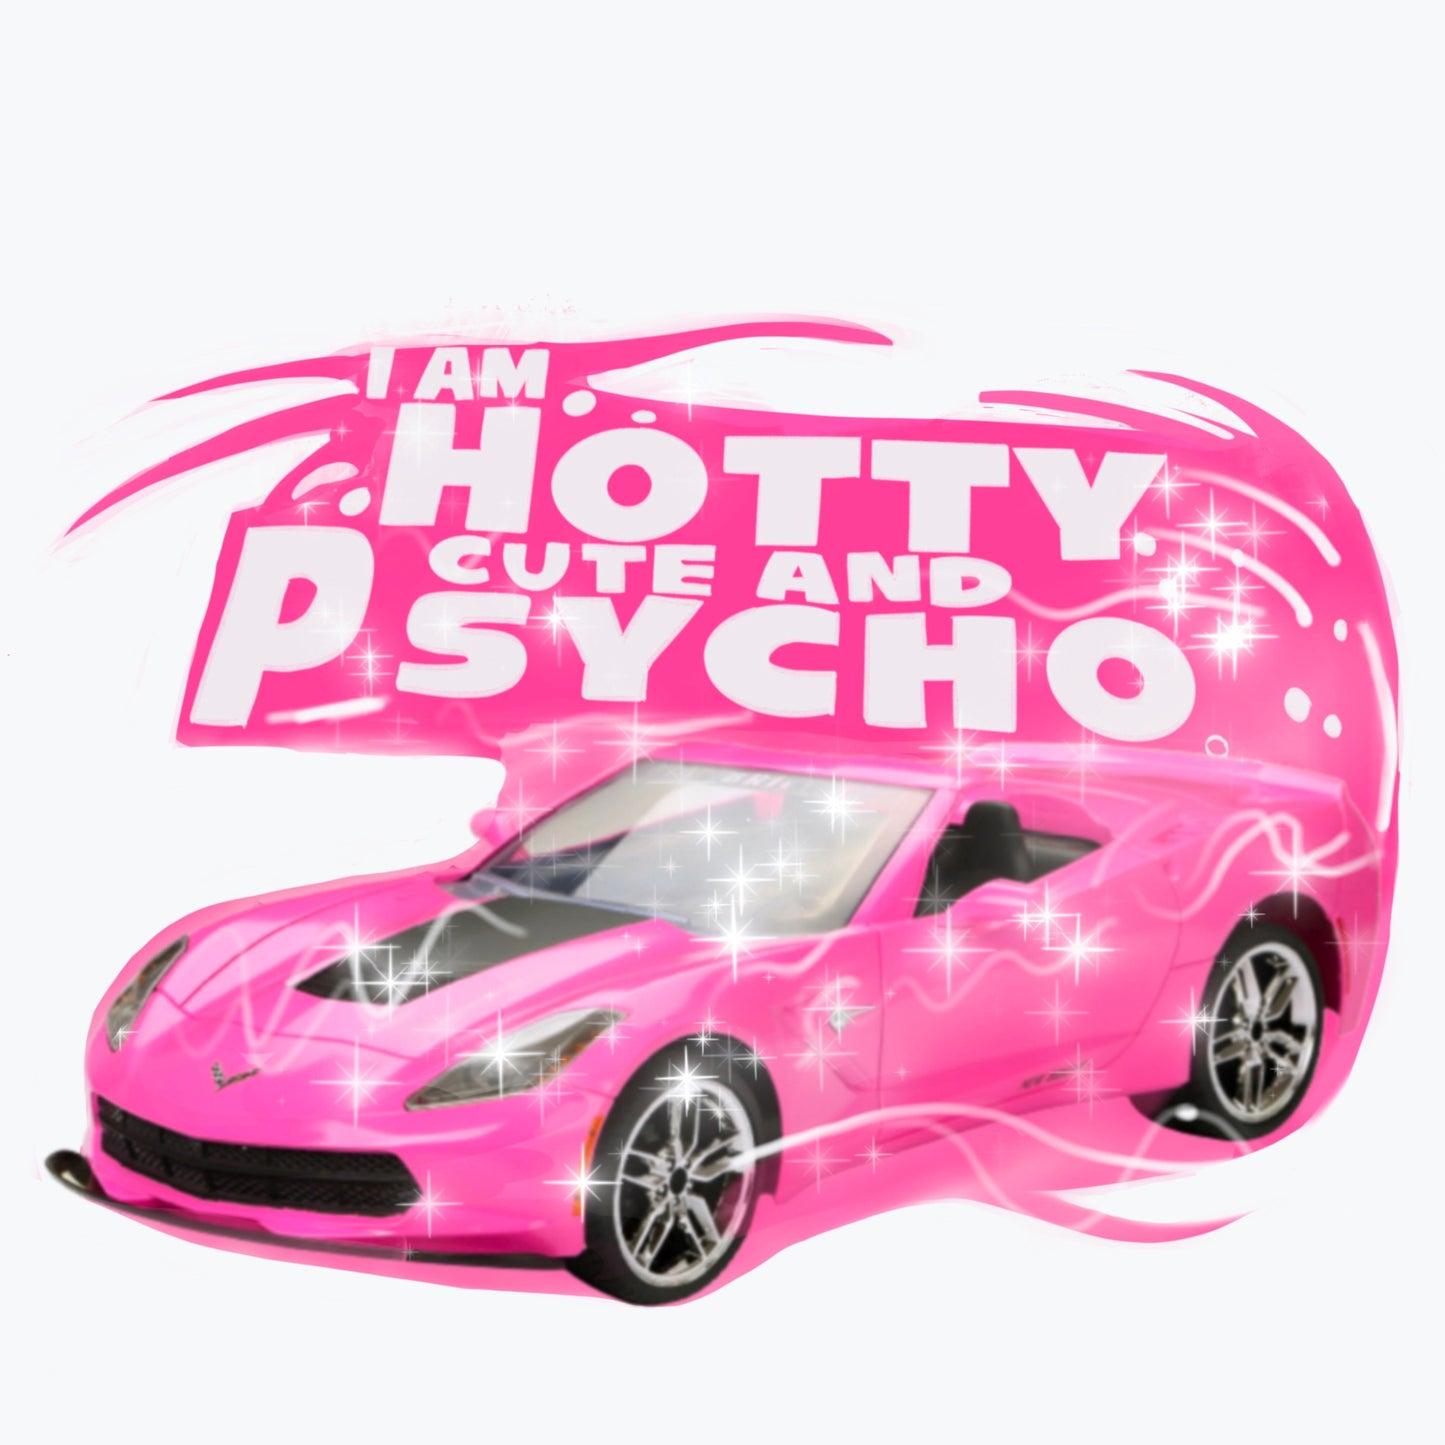 Y2K 90’s Nostalgia PNG for Sublimation| I am Hotty Cute And Psycho PNG| Digital download